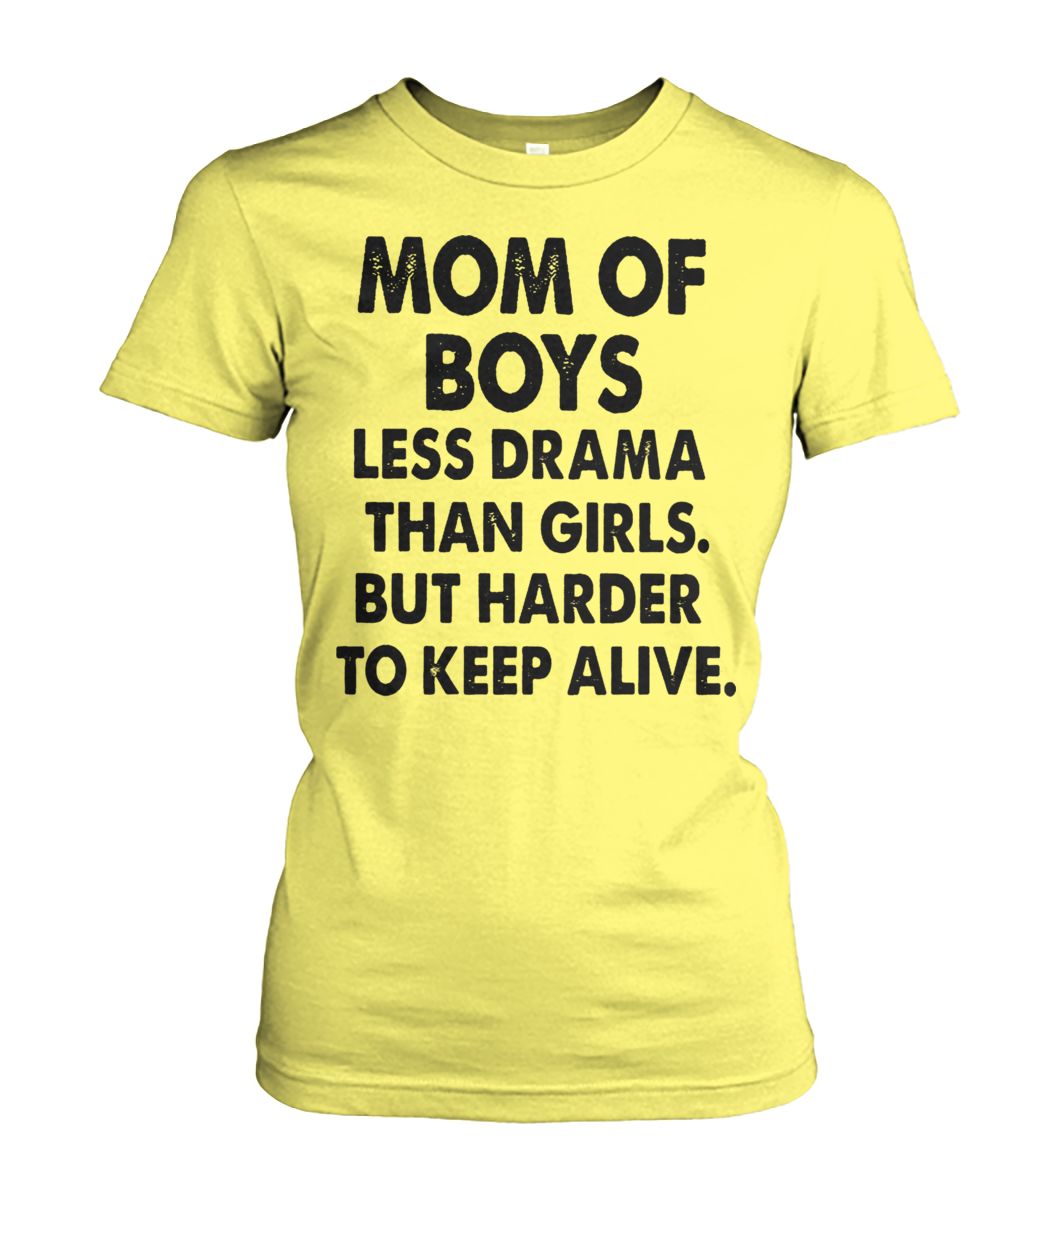 Mom of boys less drama than girls but harder to keep alive women's crew tee